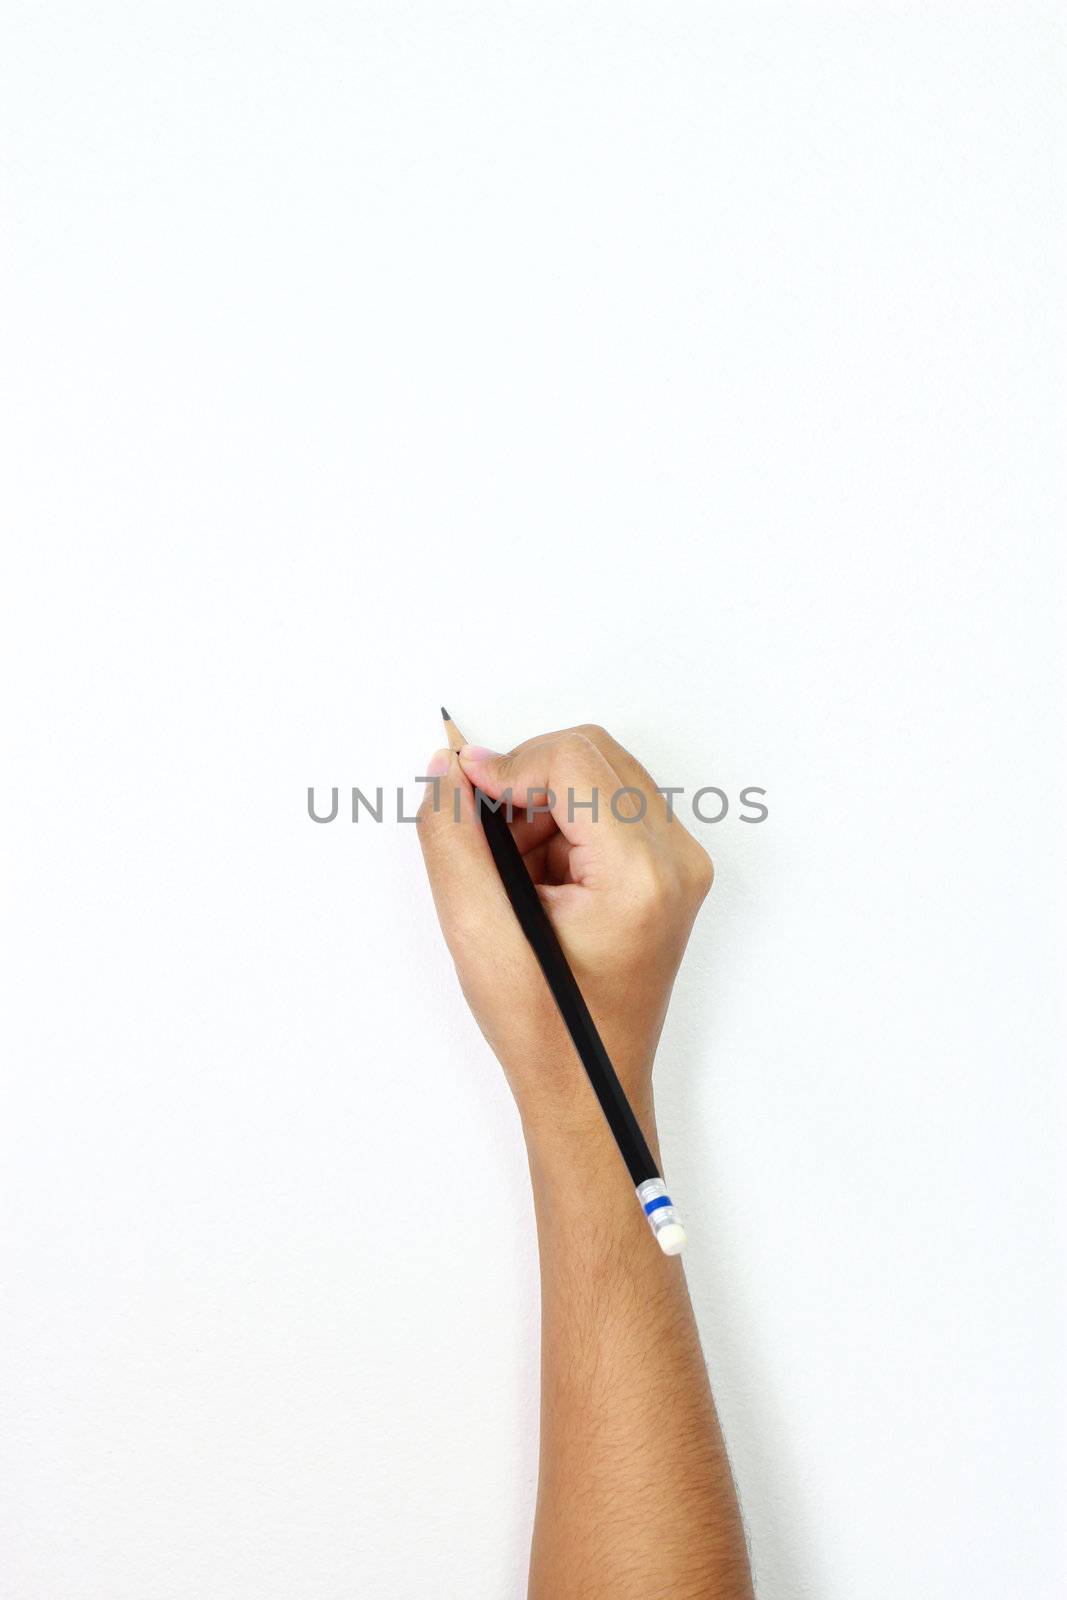 human hands with pencil and writting something by bajita111122